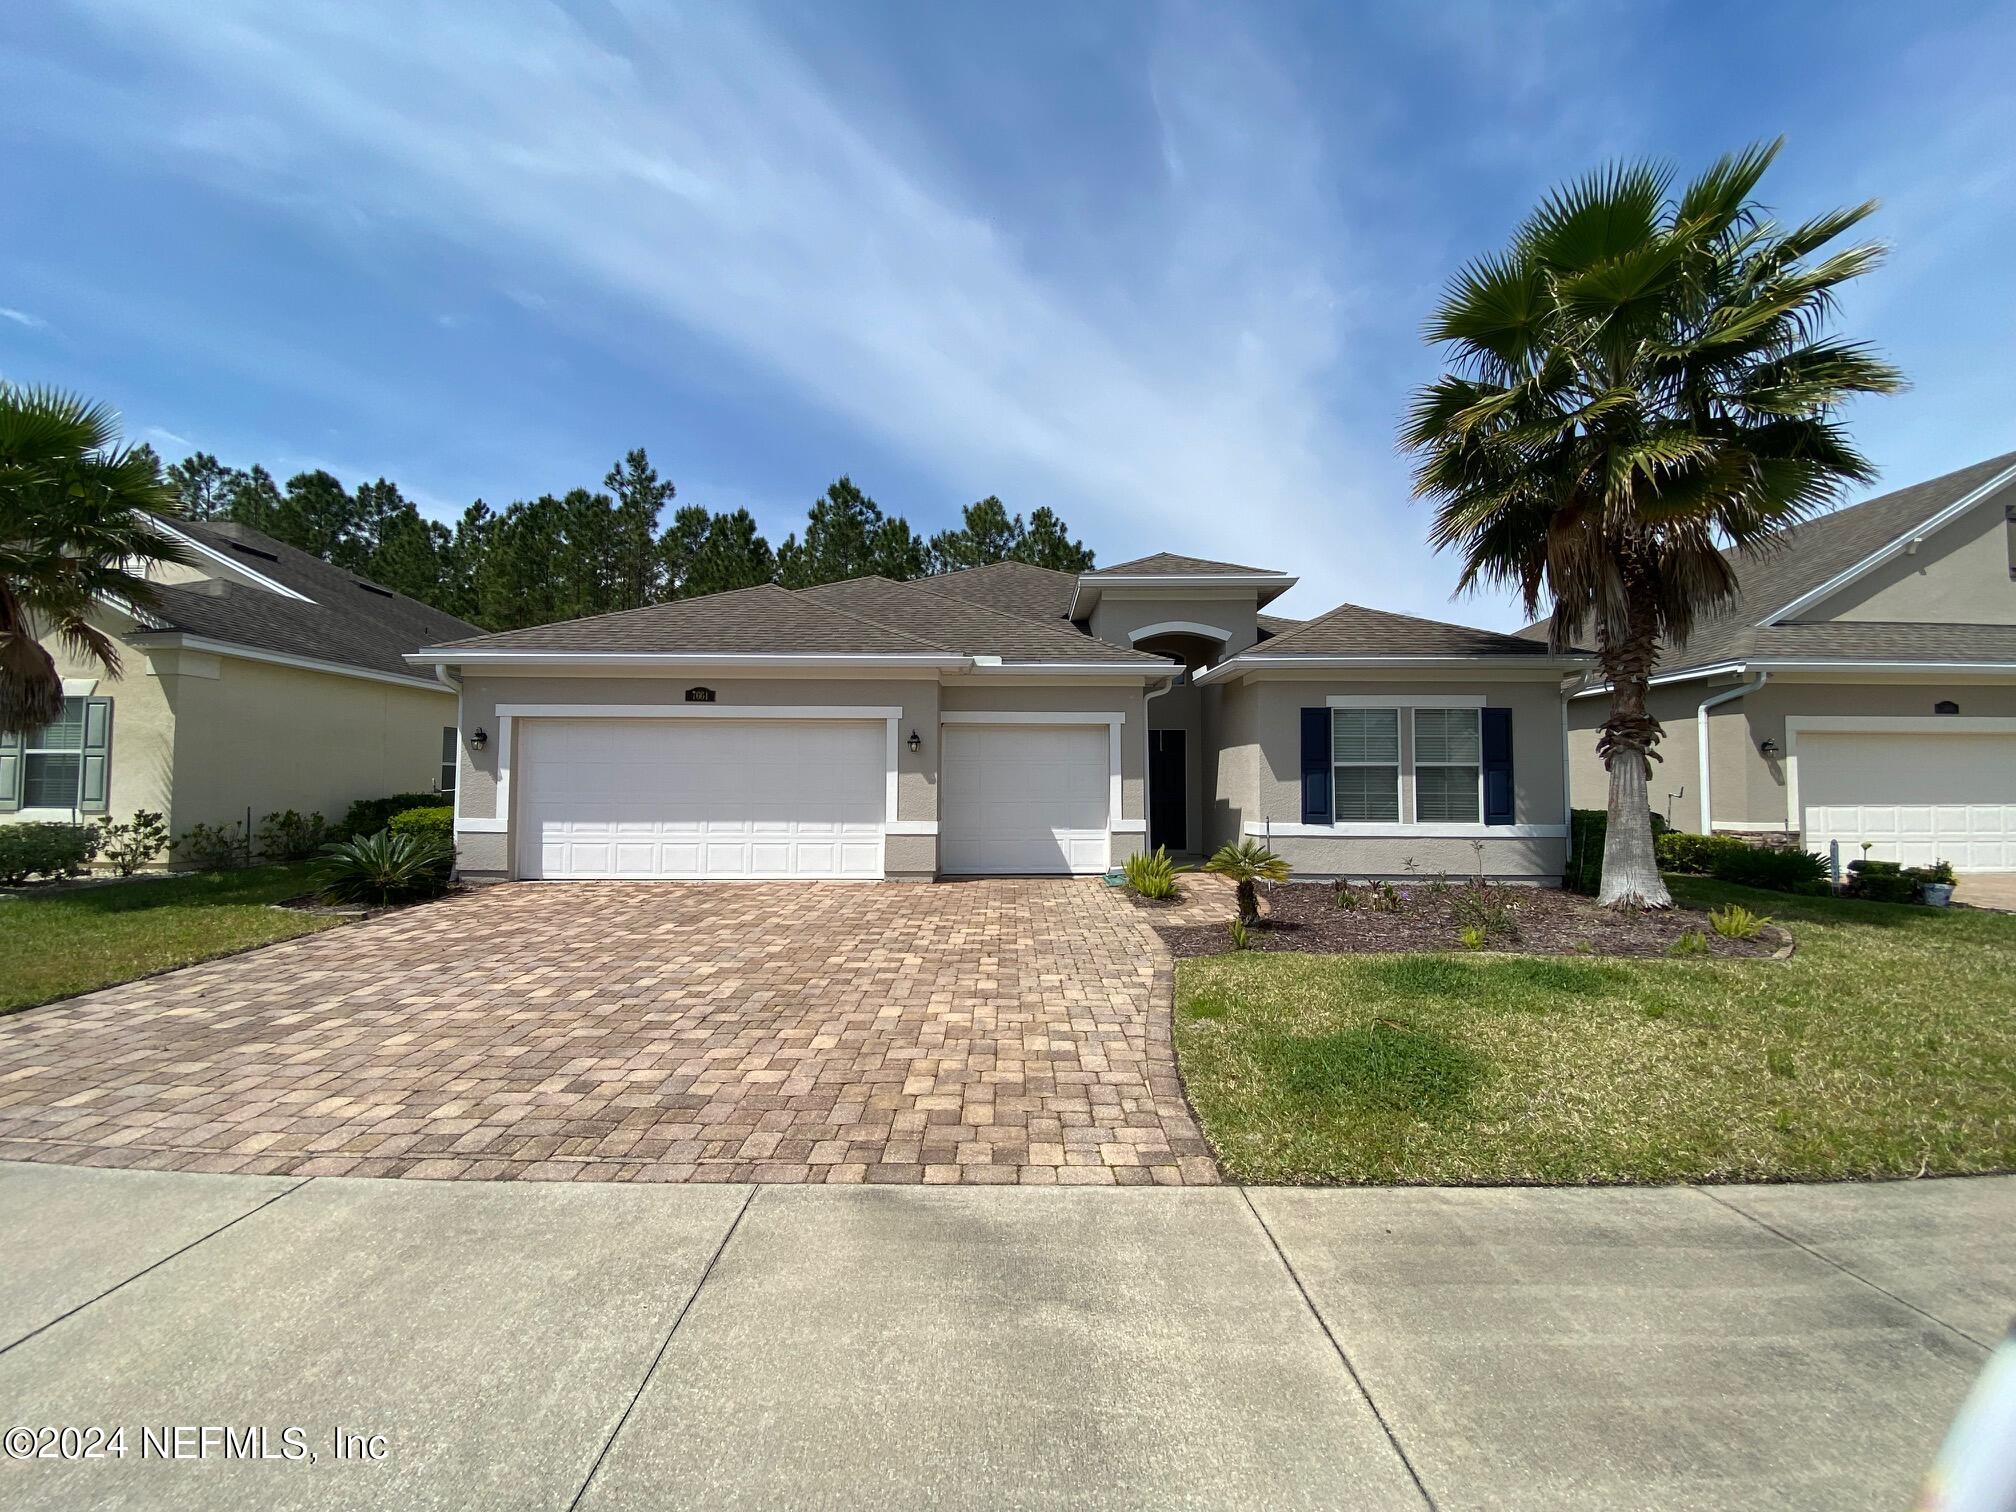 Jacksonville, FL home for sale located at 7664 ARDEN LAKES Drive, Jacksonville, FL 32222